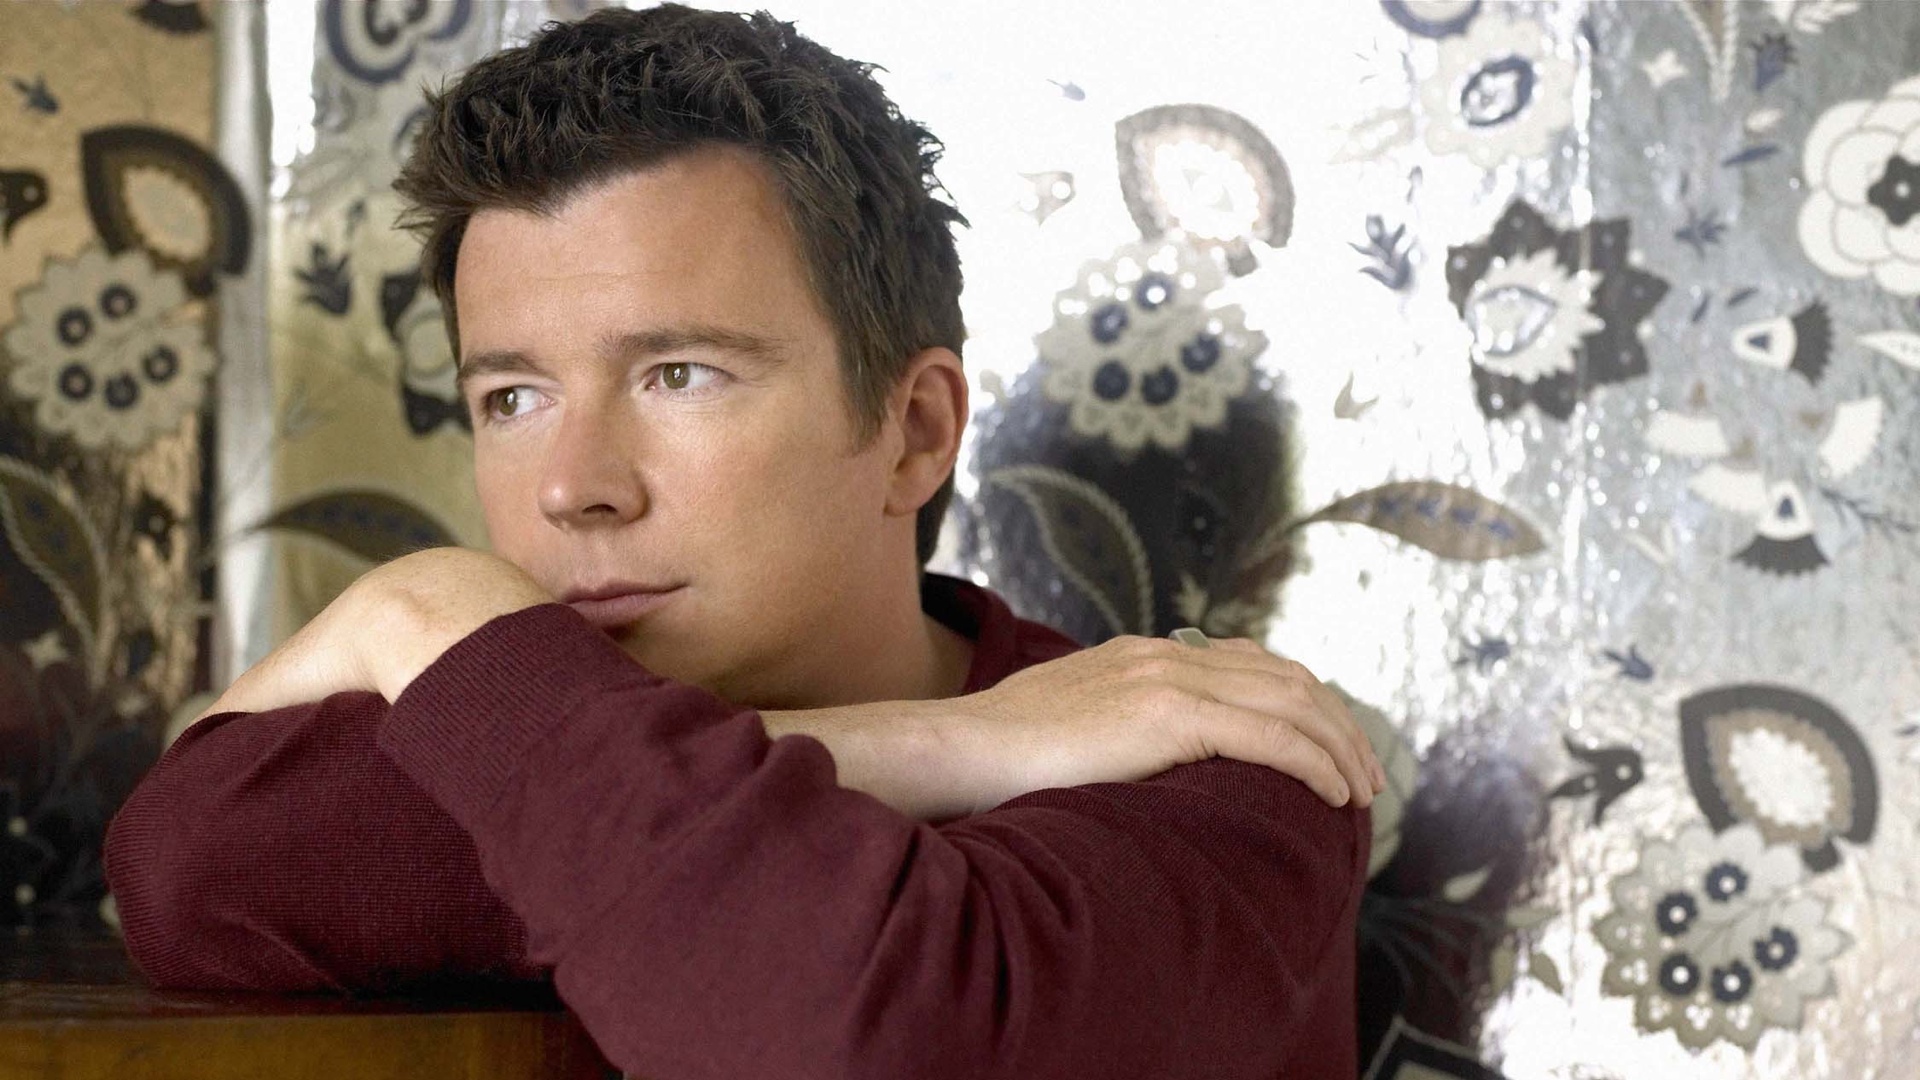 Despite millions of views thanks to "Rickrolling", Rick Astley has only made $12 from performance royalties from his video of "Never Gonna Give You Up."